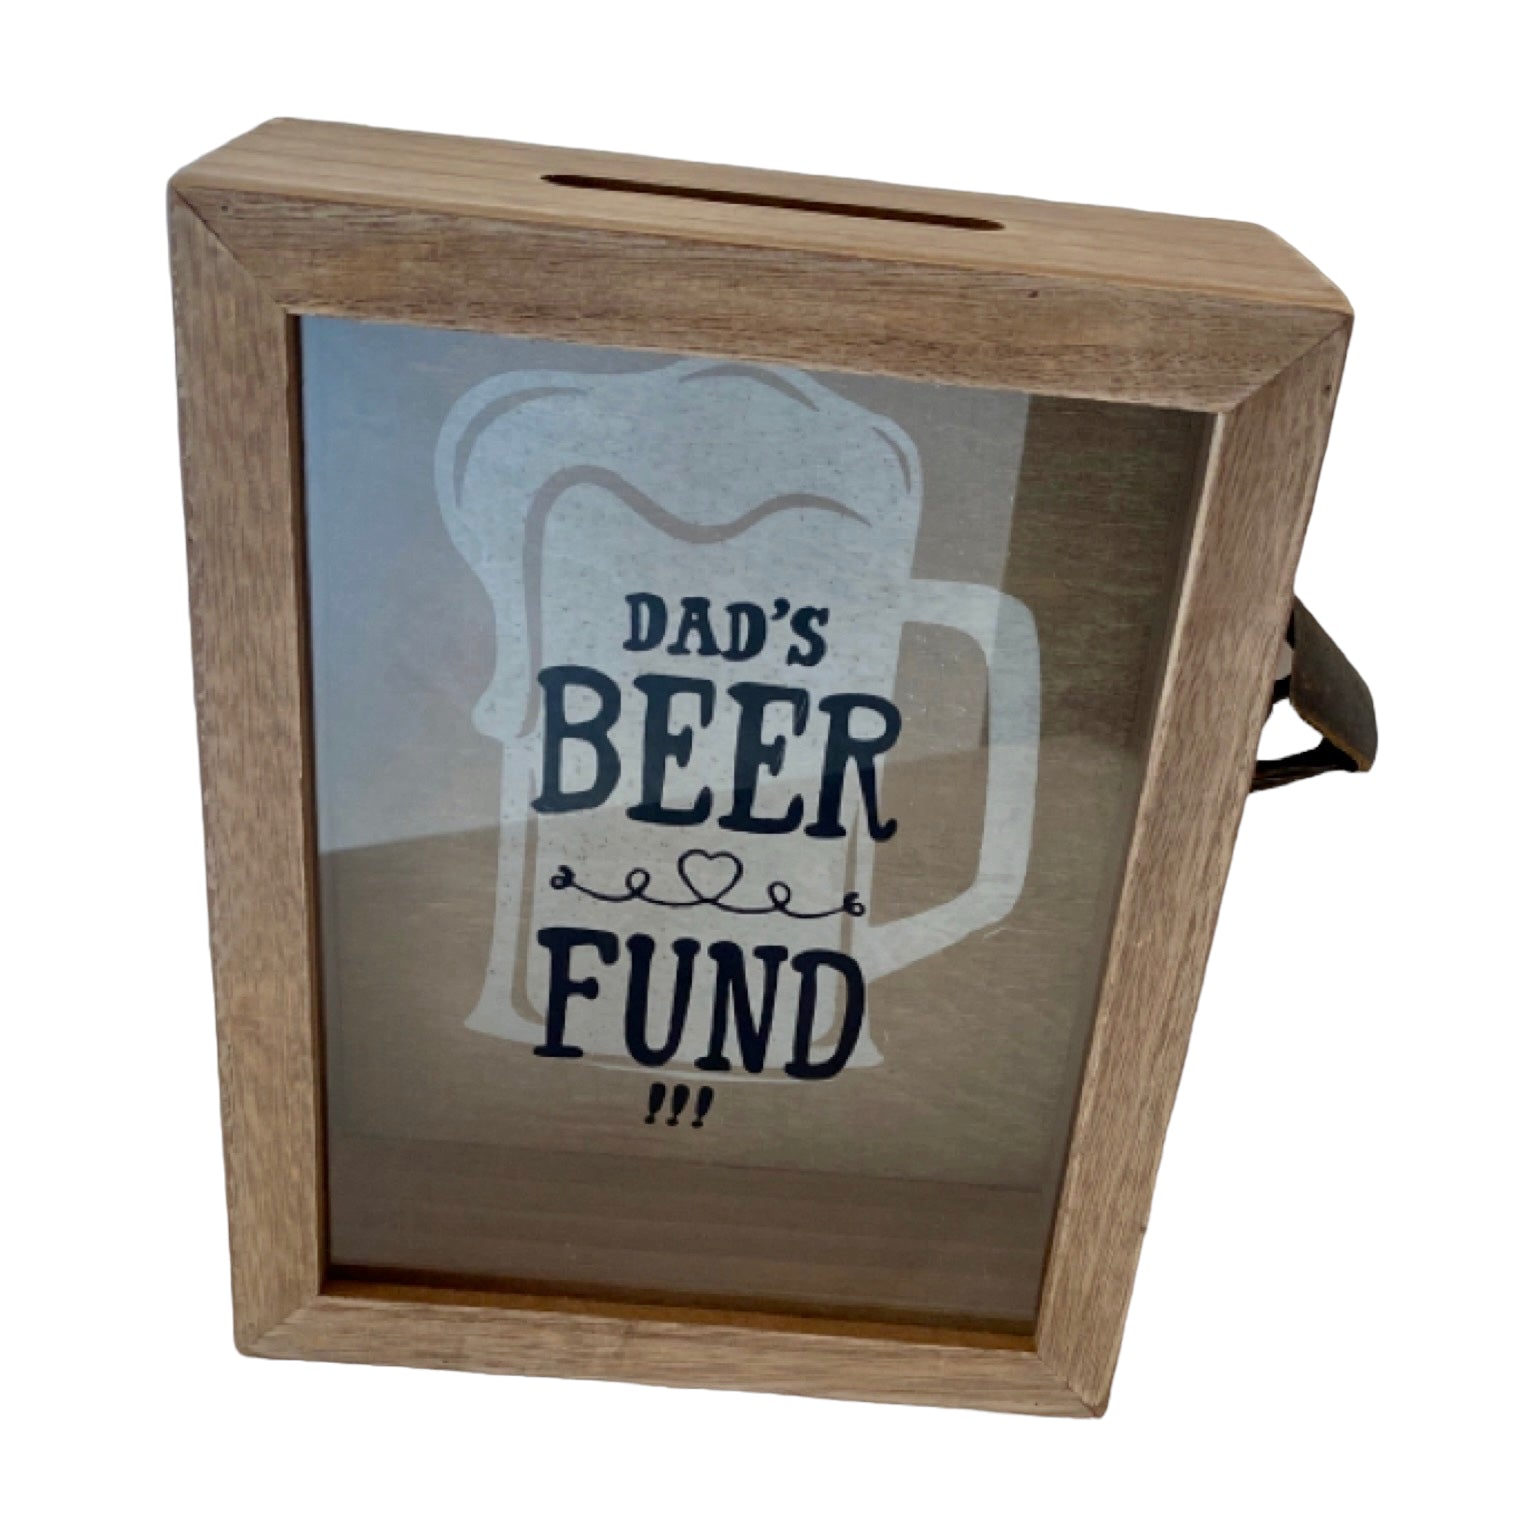 Money Box Dads Beer Fund Rustic with Bottle Opener - The Renmy Store Homewares & Gifts 